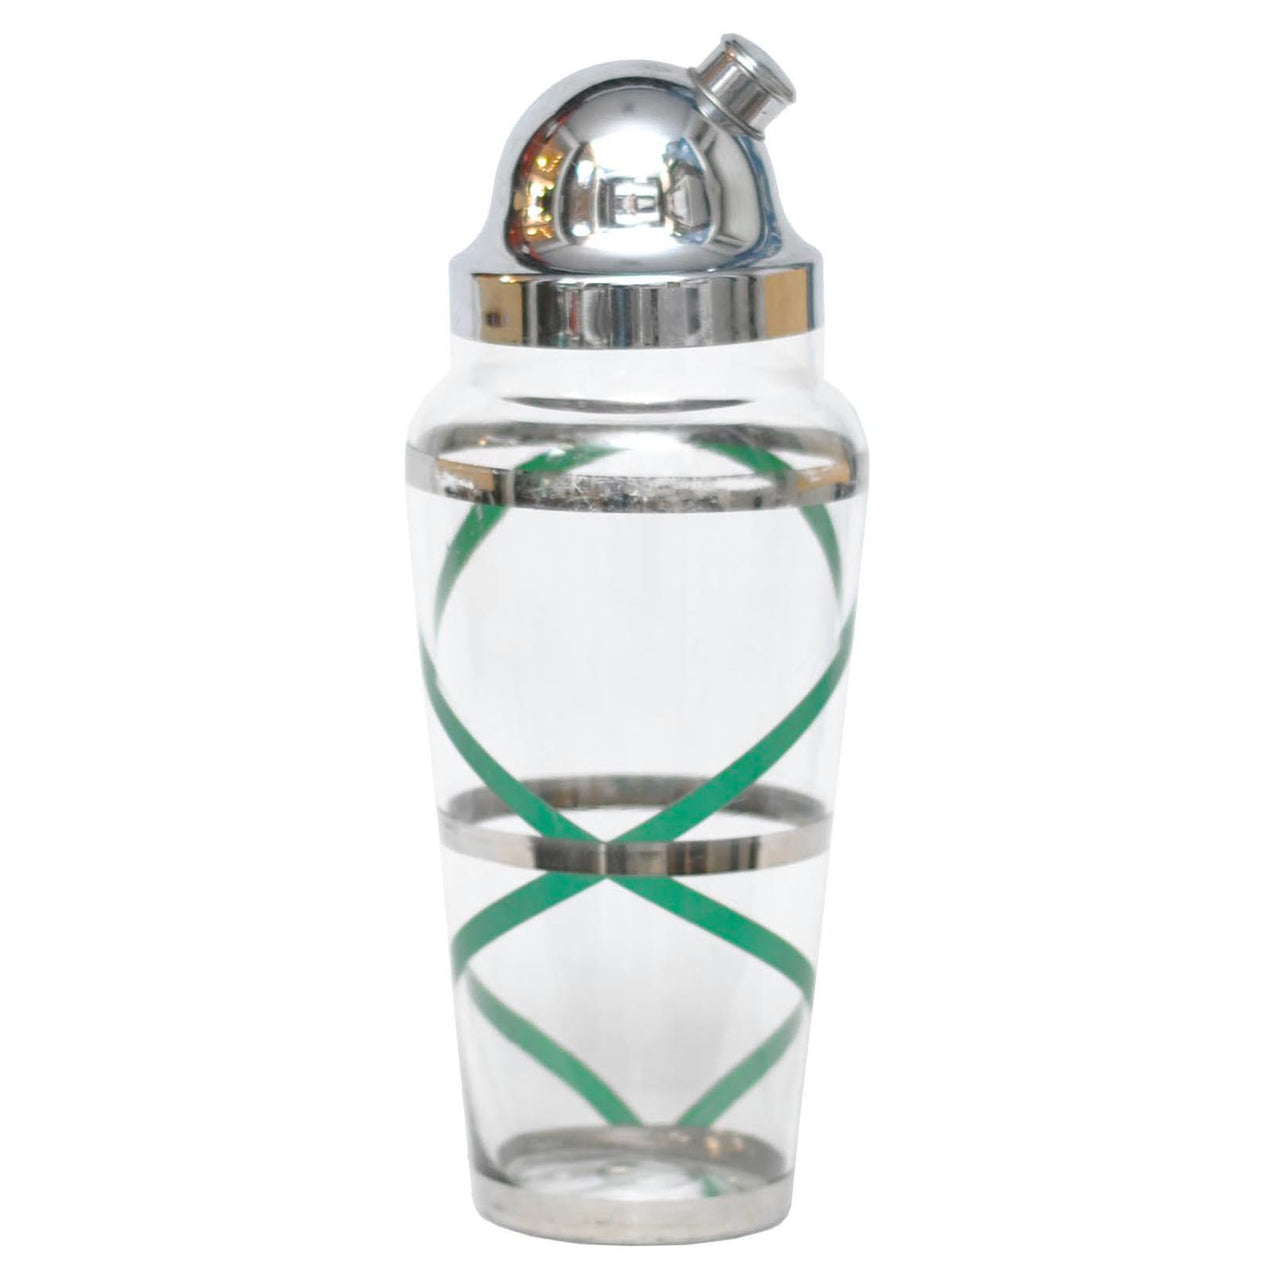 Vintage Green Ribbons and Silver Rings Cocktail Shaker | The Hour Shop